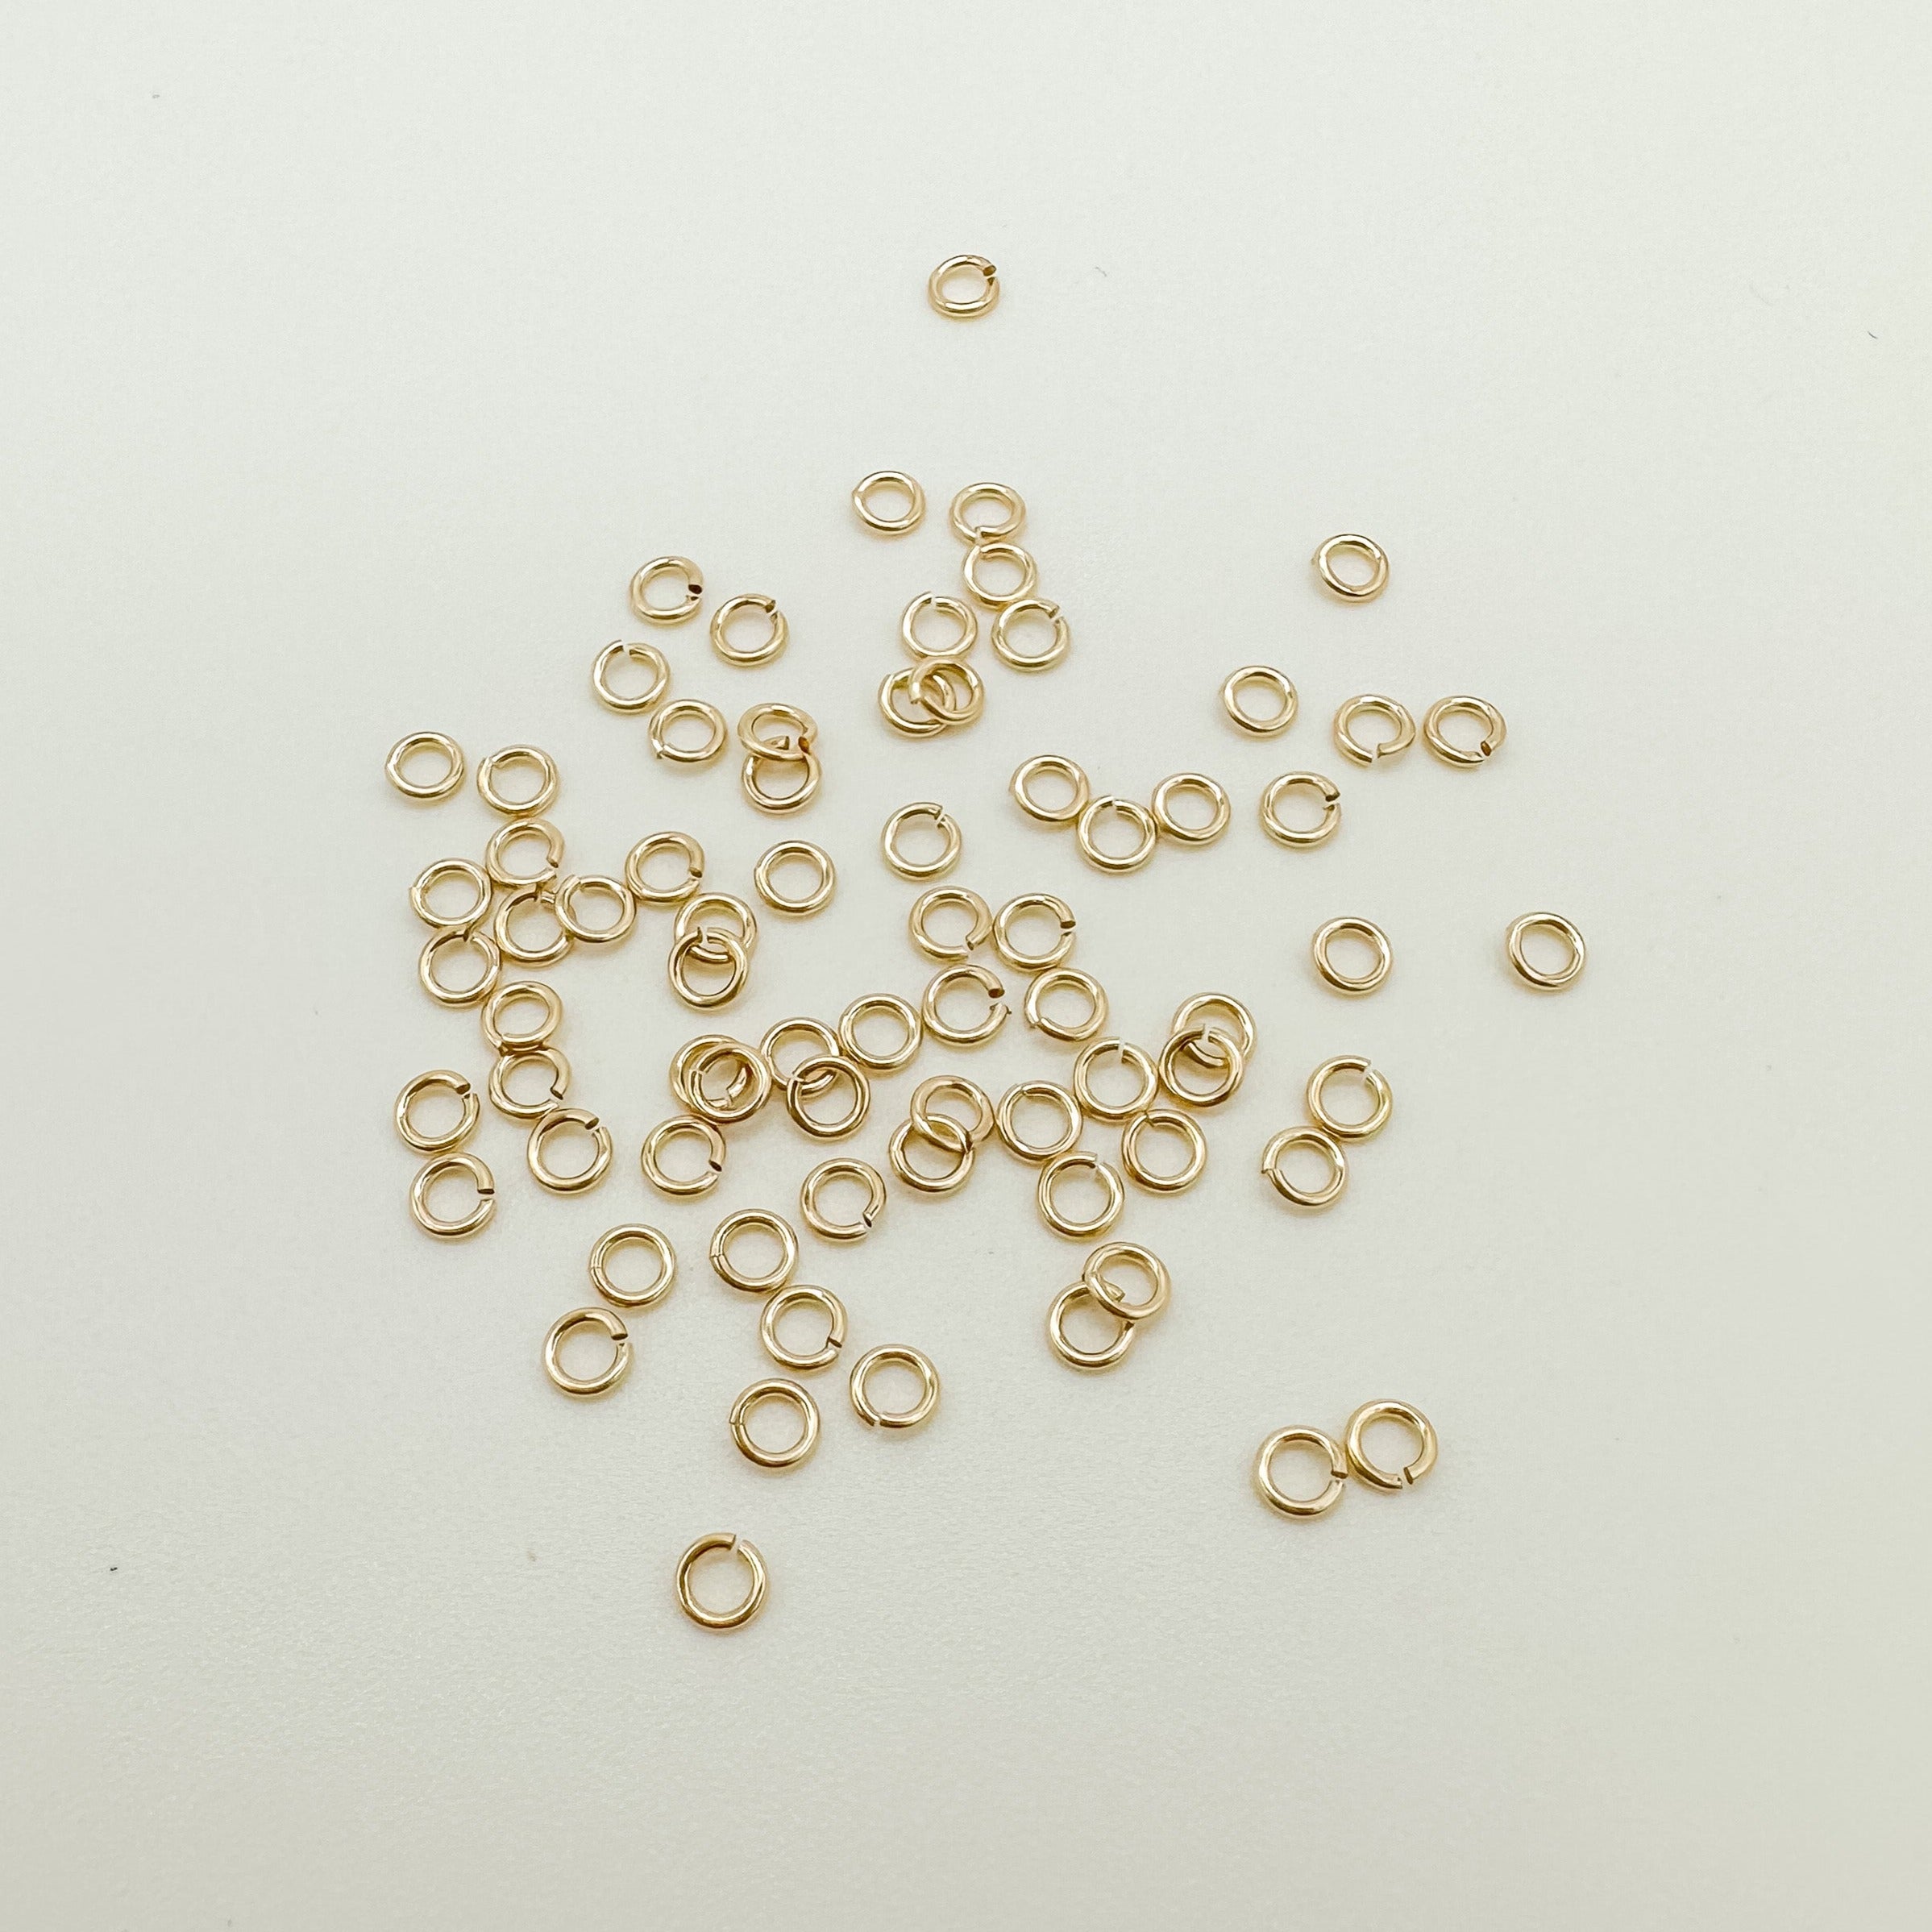 2.5mm 24g gold-filled jump rings